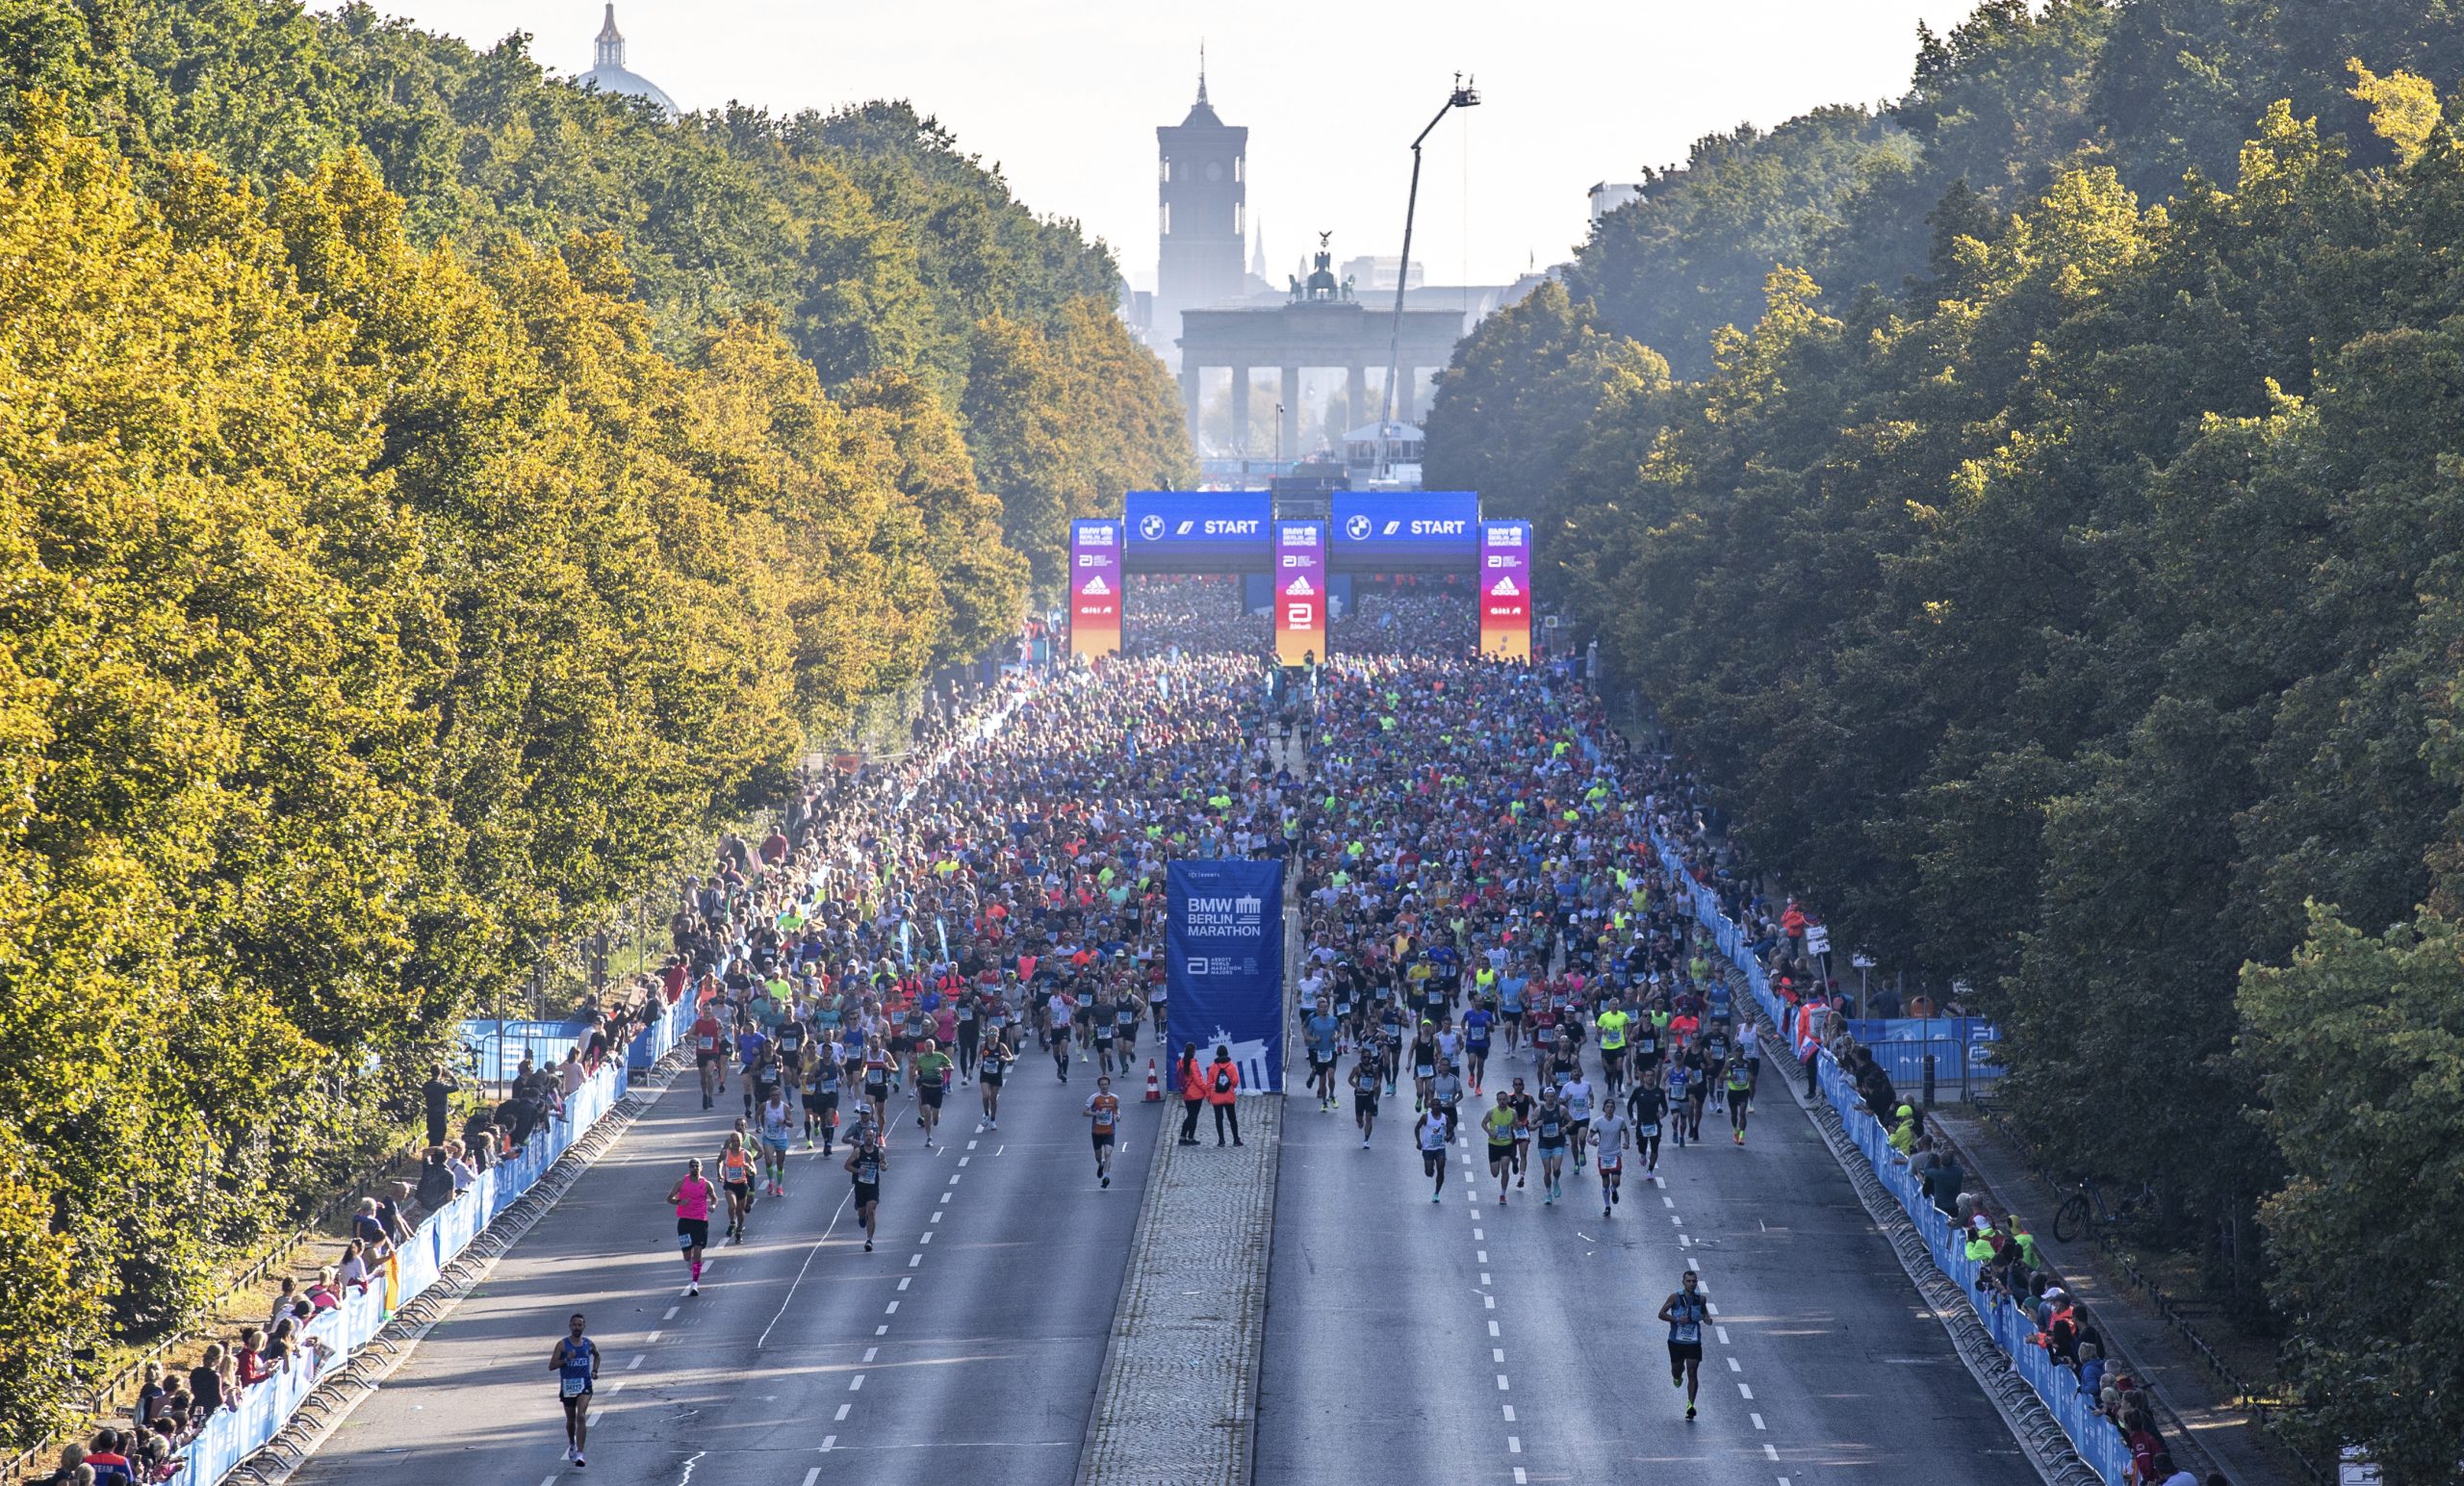 26 September 2021, Berlin: Athletics: Marathon. The runners of the second wave start on the street of June 17 for the BMW Berlin Marathon. Photo by: Andreas Gora/picture-alliance/dpa/AP Images